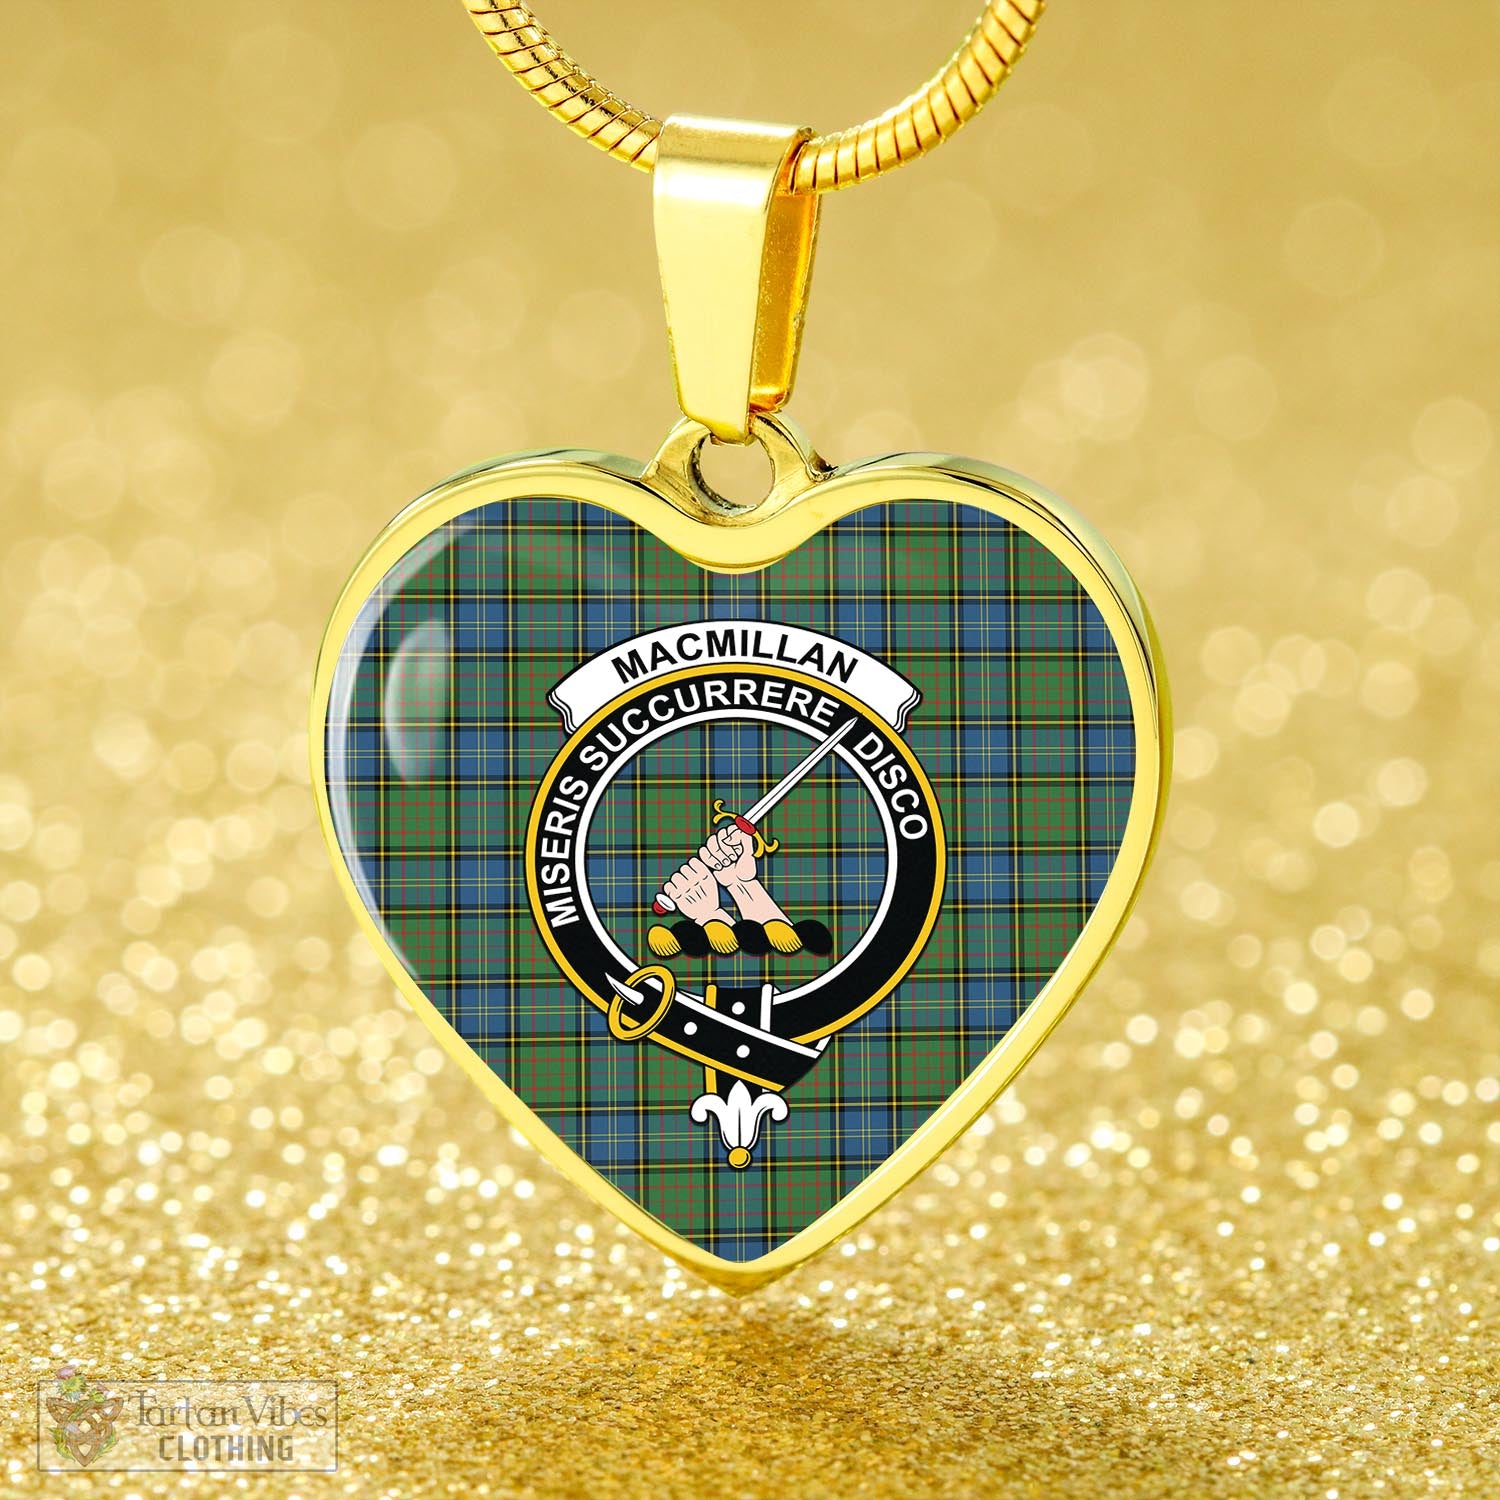 Tartan Vibes Clothing MacMillan Hunting Ancient Tartan Heart Necklace with Family Crest